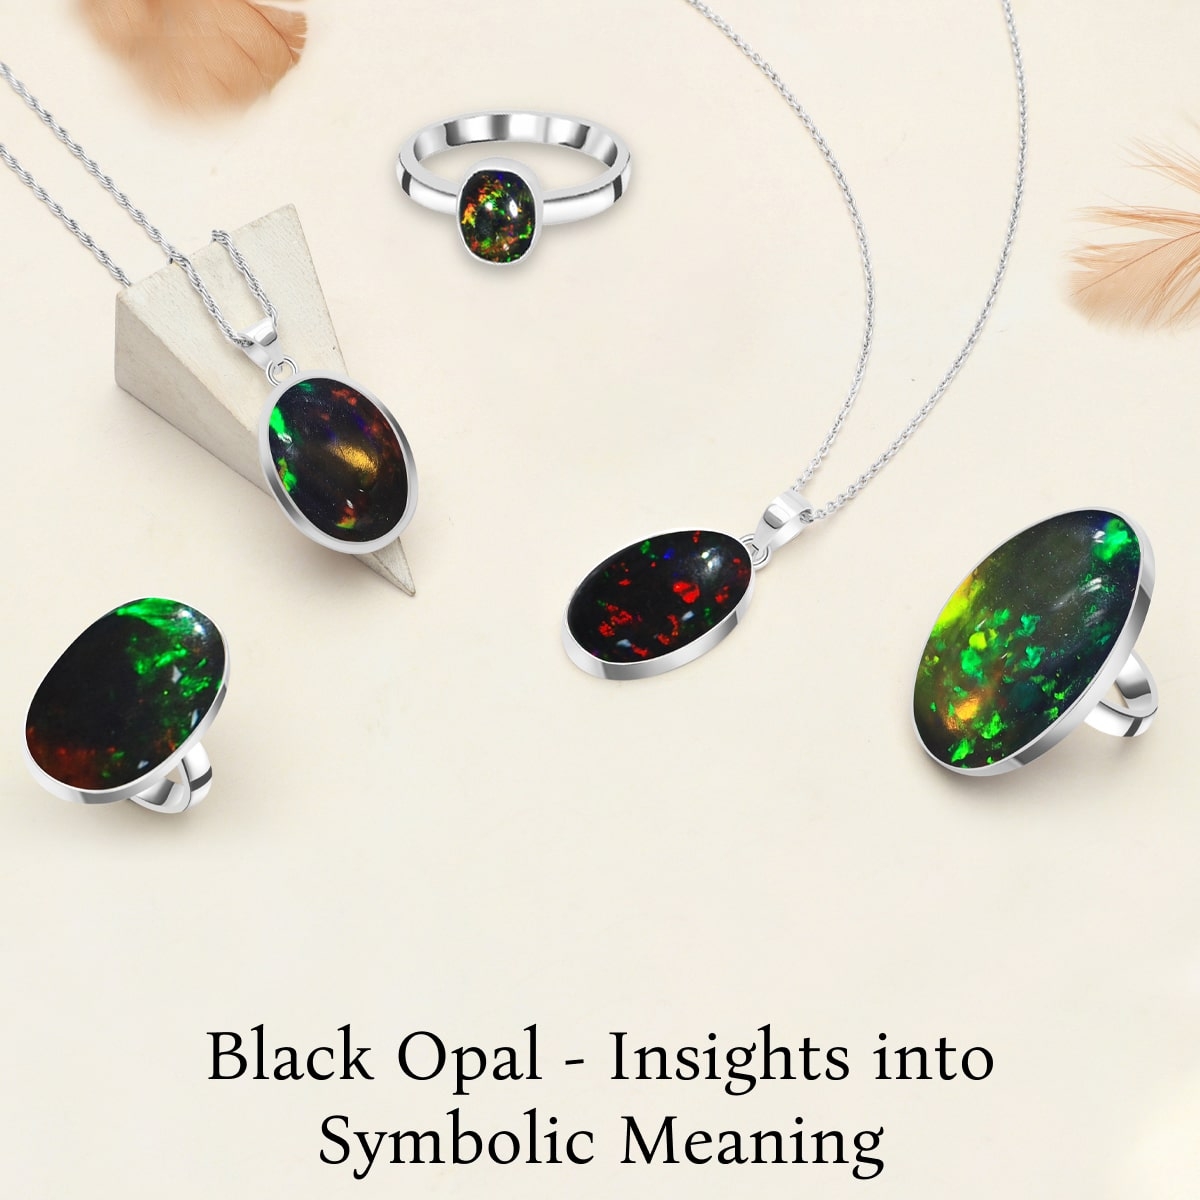 Black Opal Meaning and Symbolism